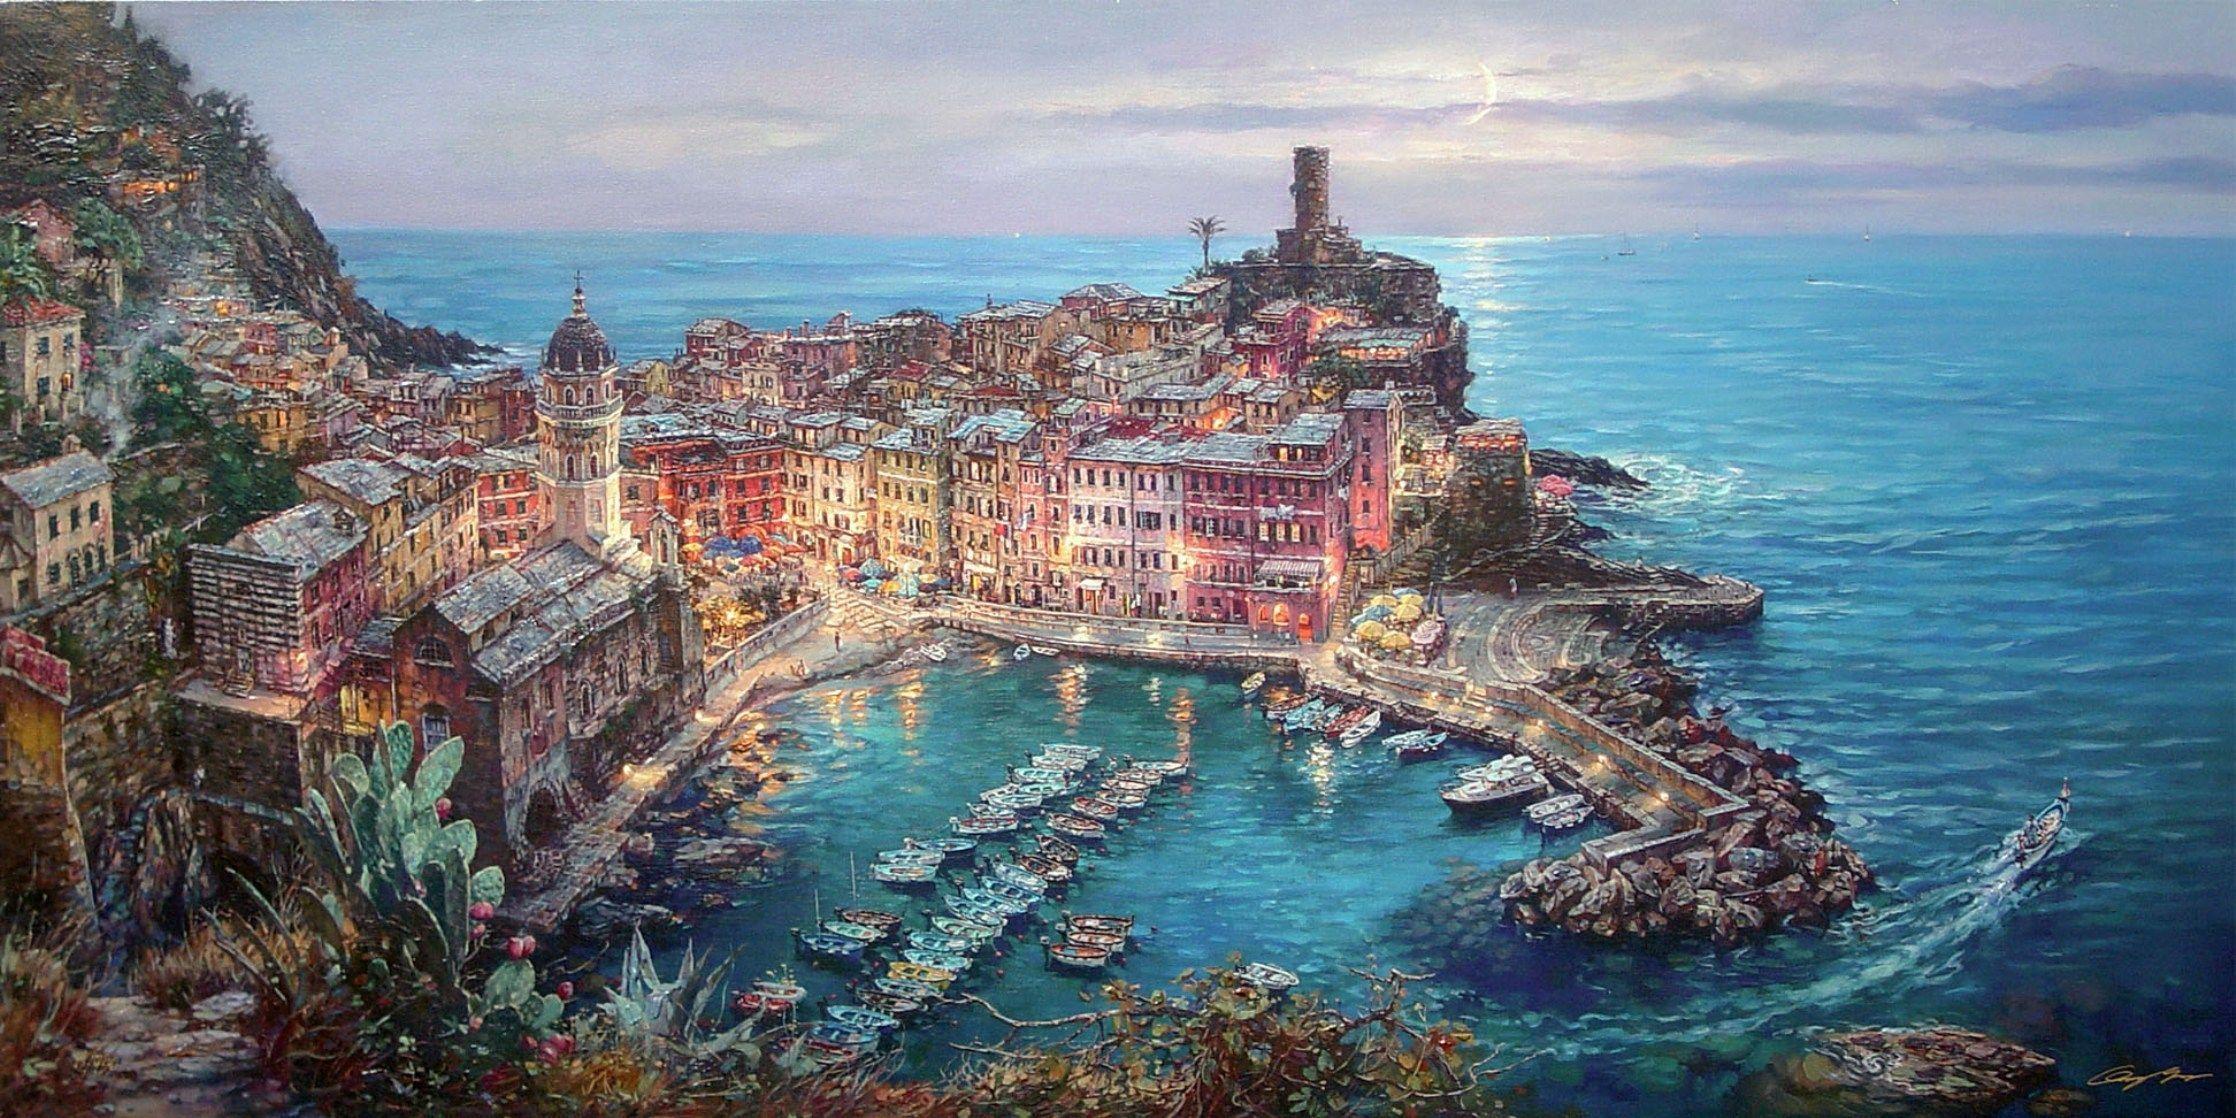 Download wallpaper painting, Mediterranean, Vernazza, Italy free